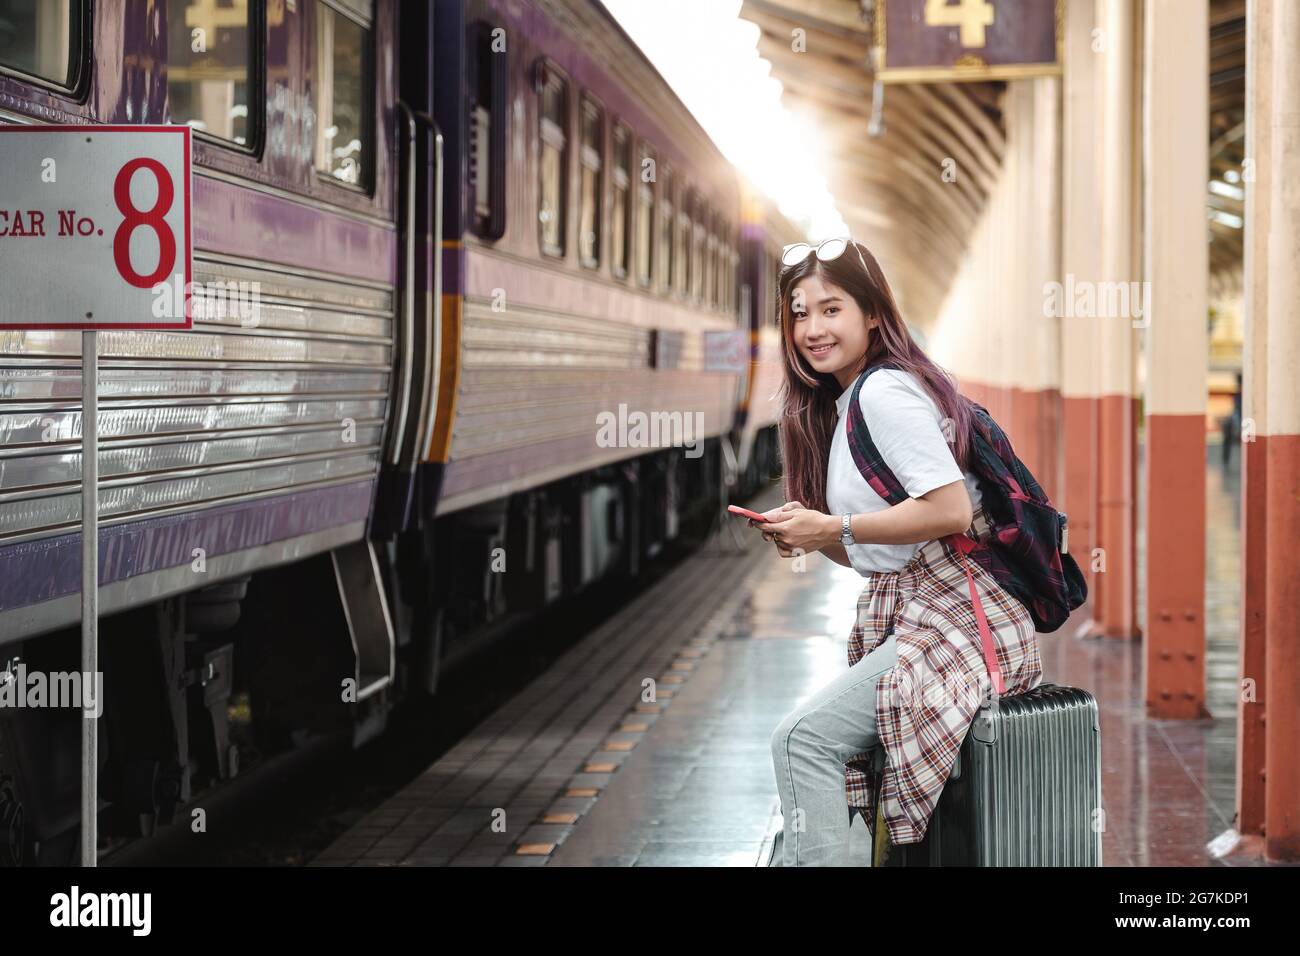 Portrait attraction asian Woman traveler tourist sitting with luggage at train station. Active and travel lifestyle concept. Stock Photo